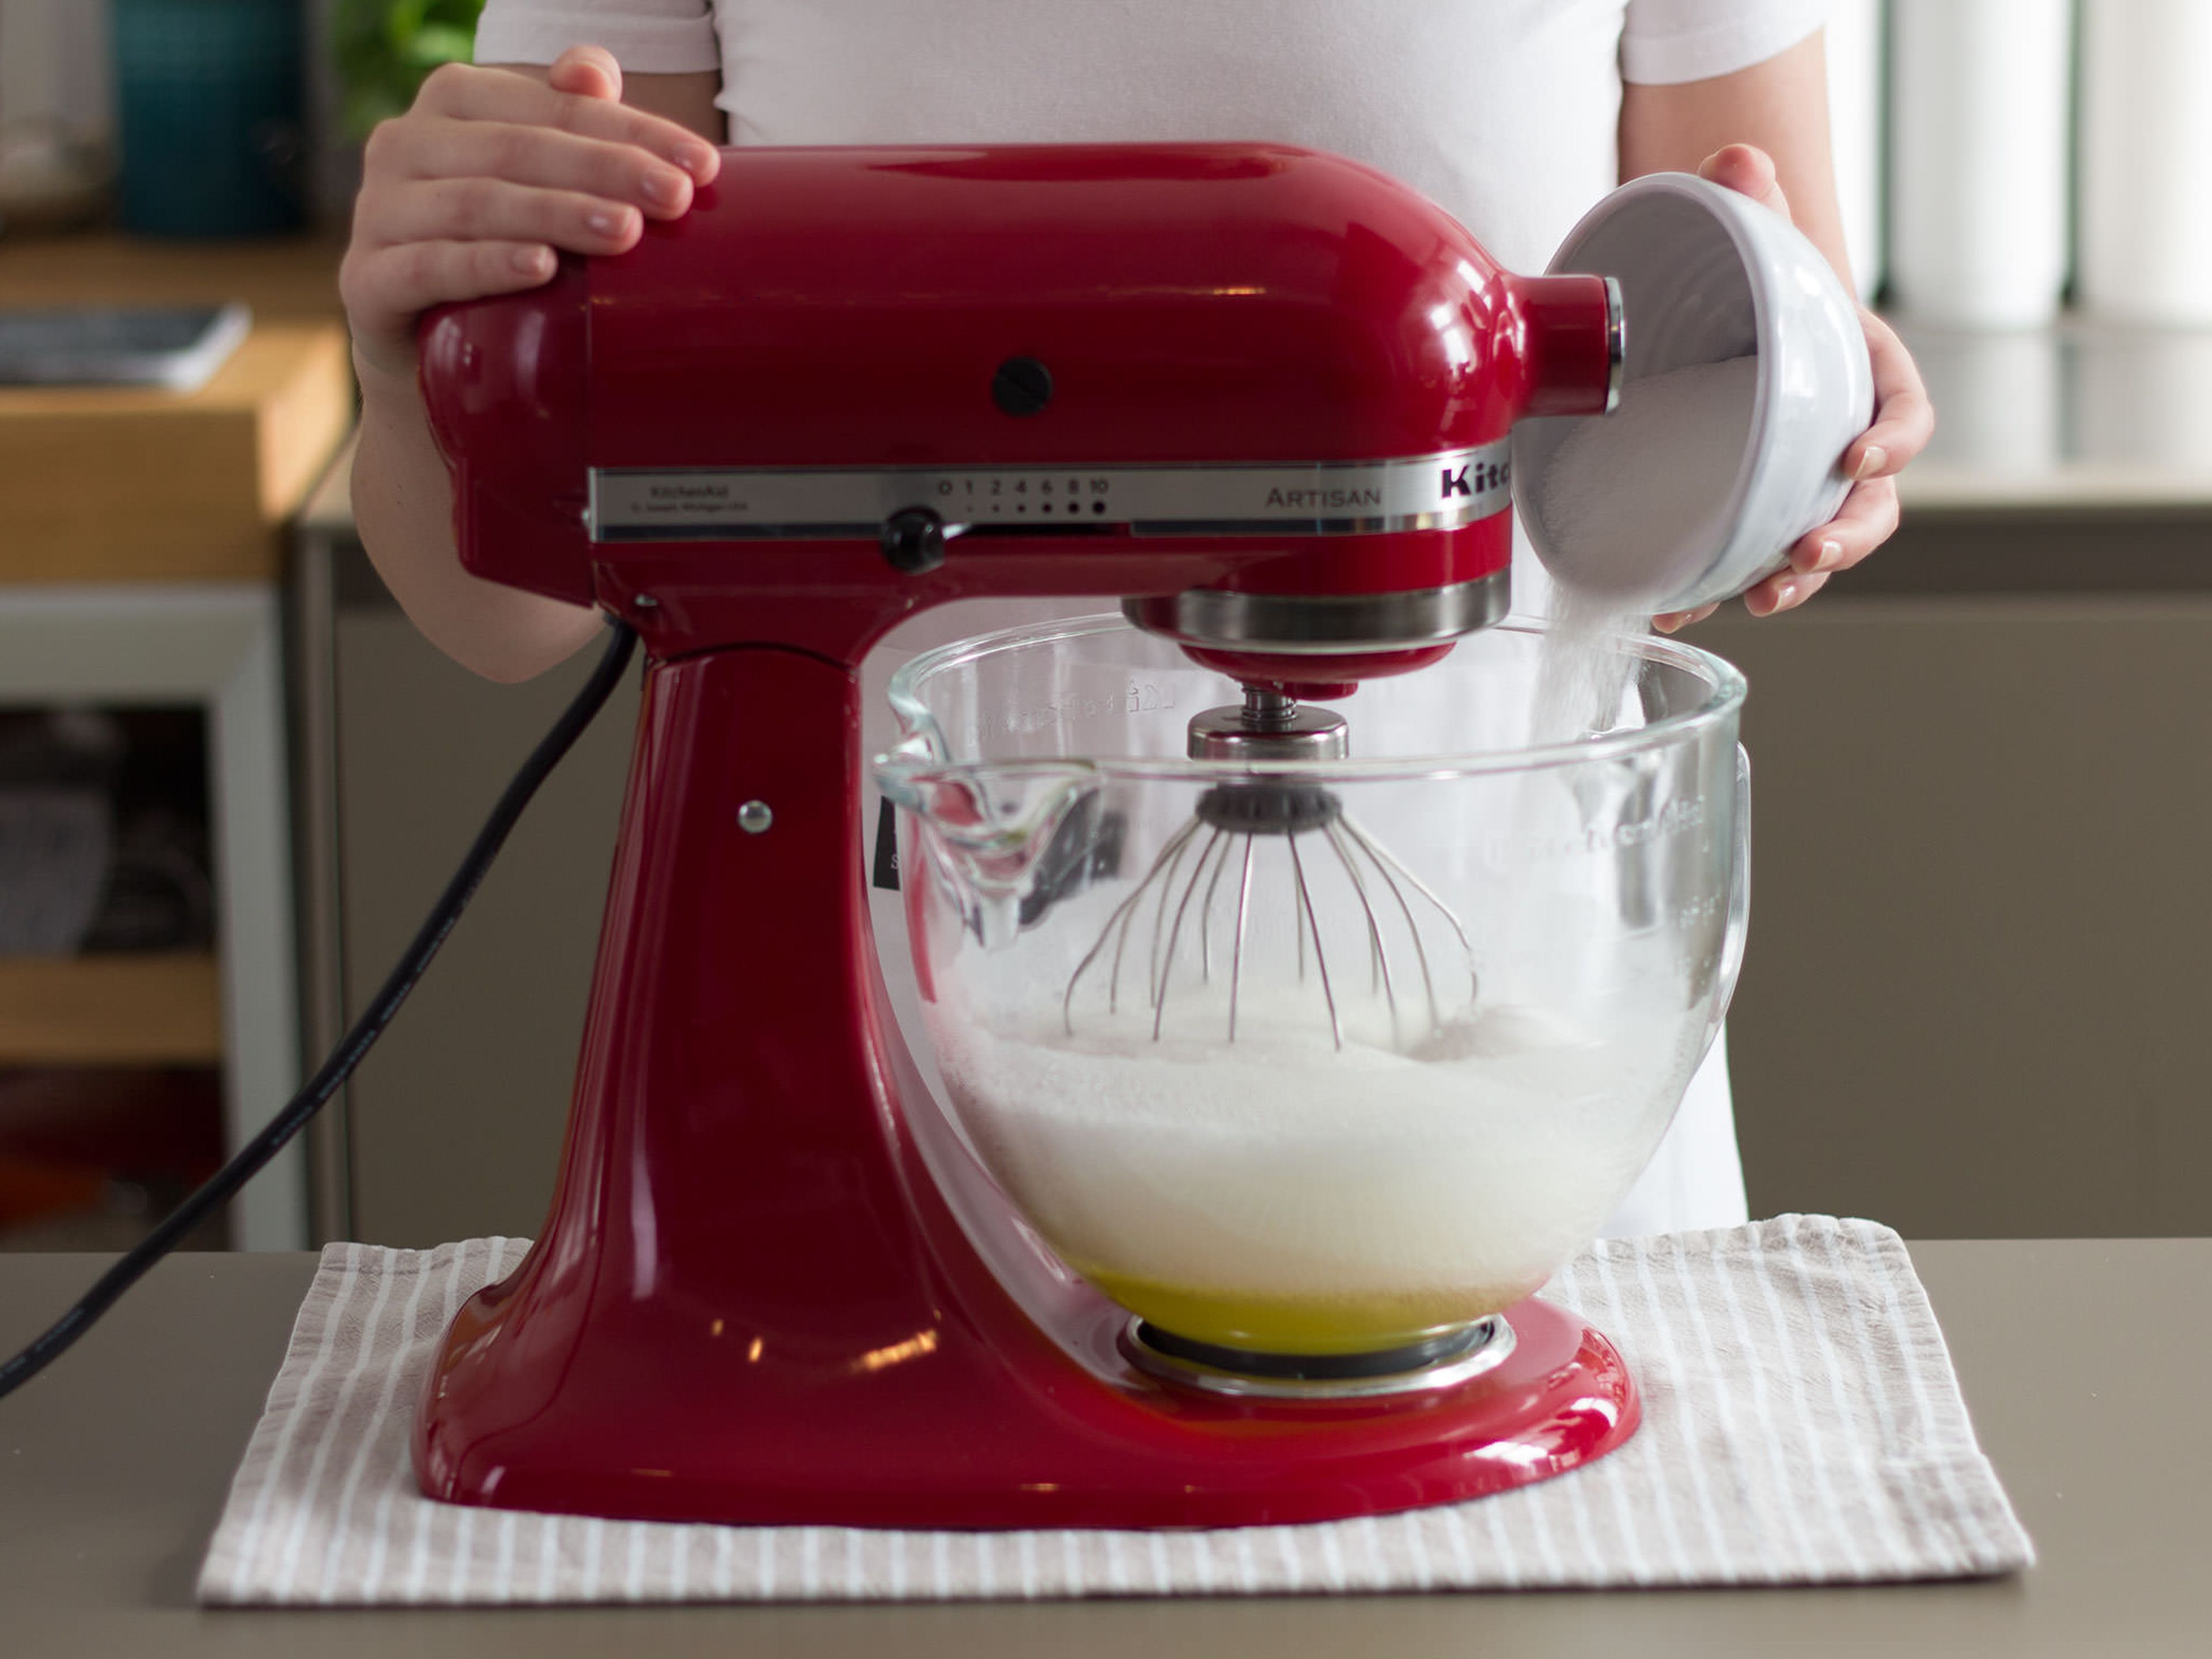 Preheat oven to 180°C/350°F. Separate egg yolks from egg whites. In a stand mixer bowl, beat together sugar and egg whites, for approx. 3 – 5 min., until stiff peaks form.